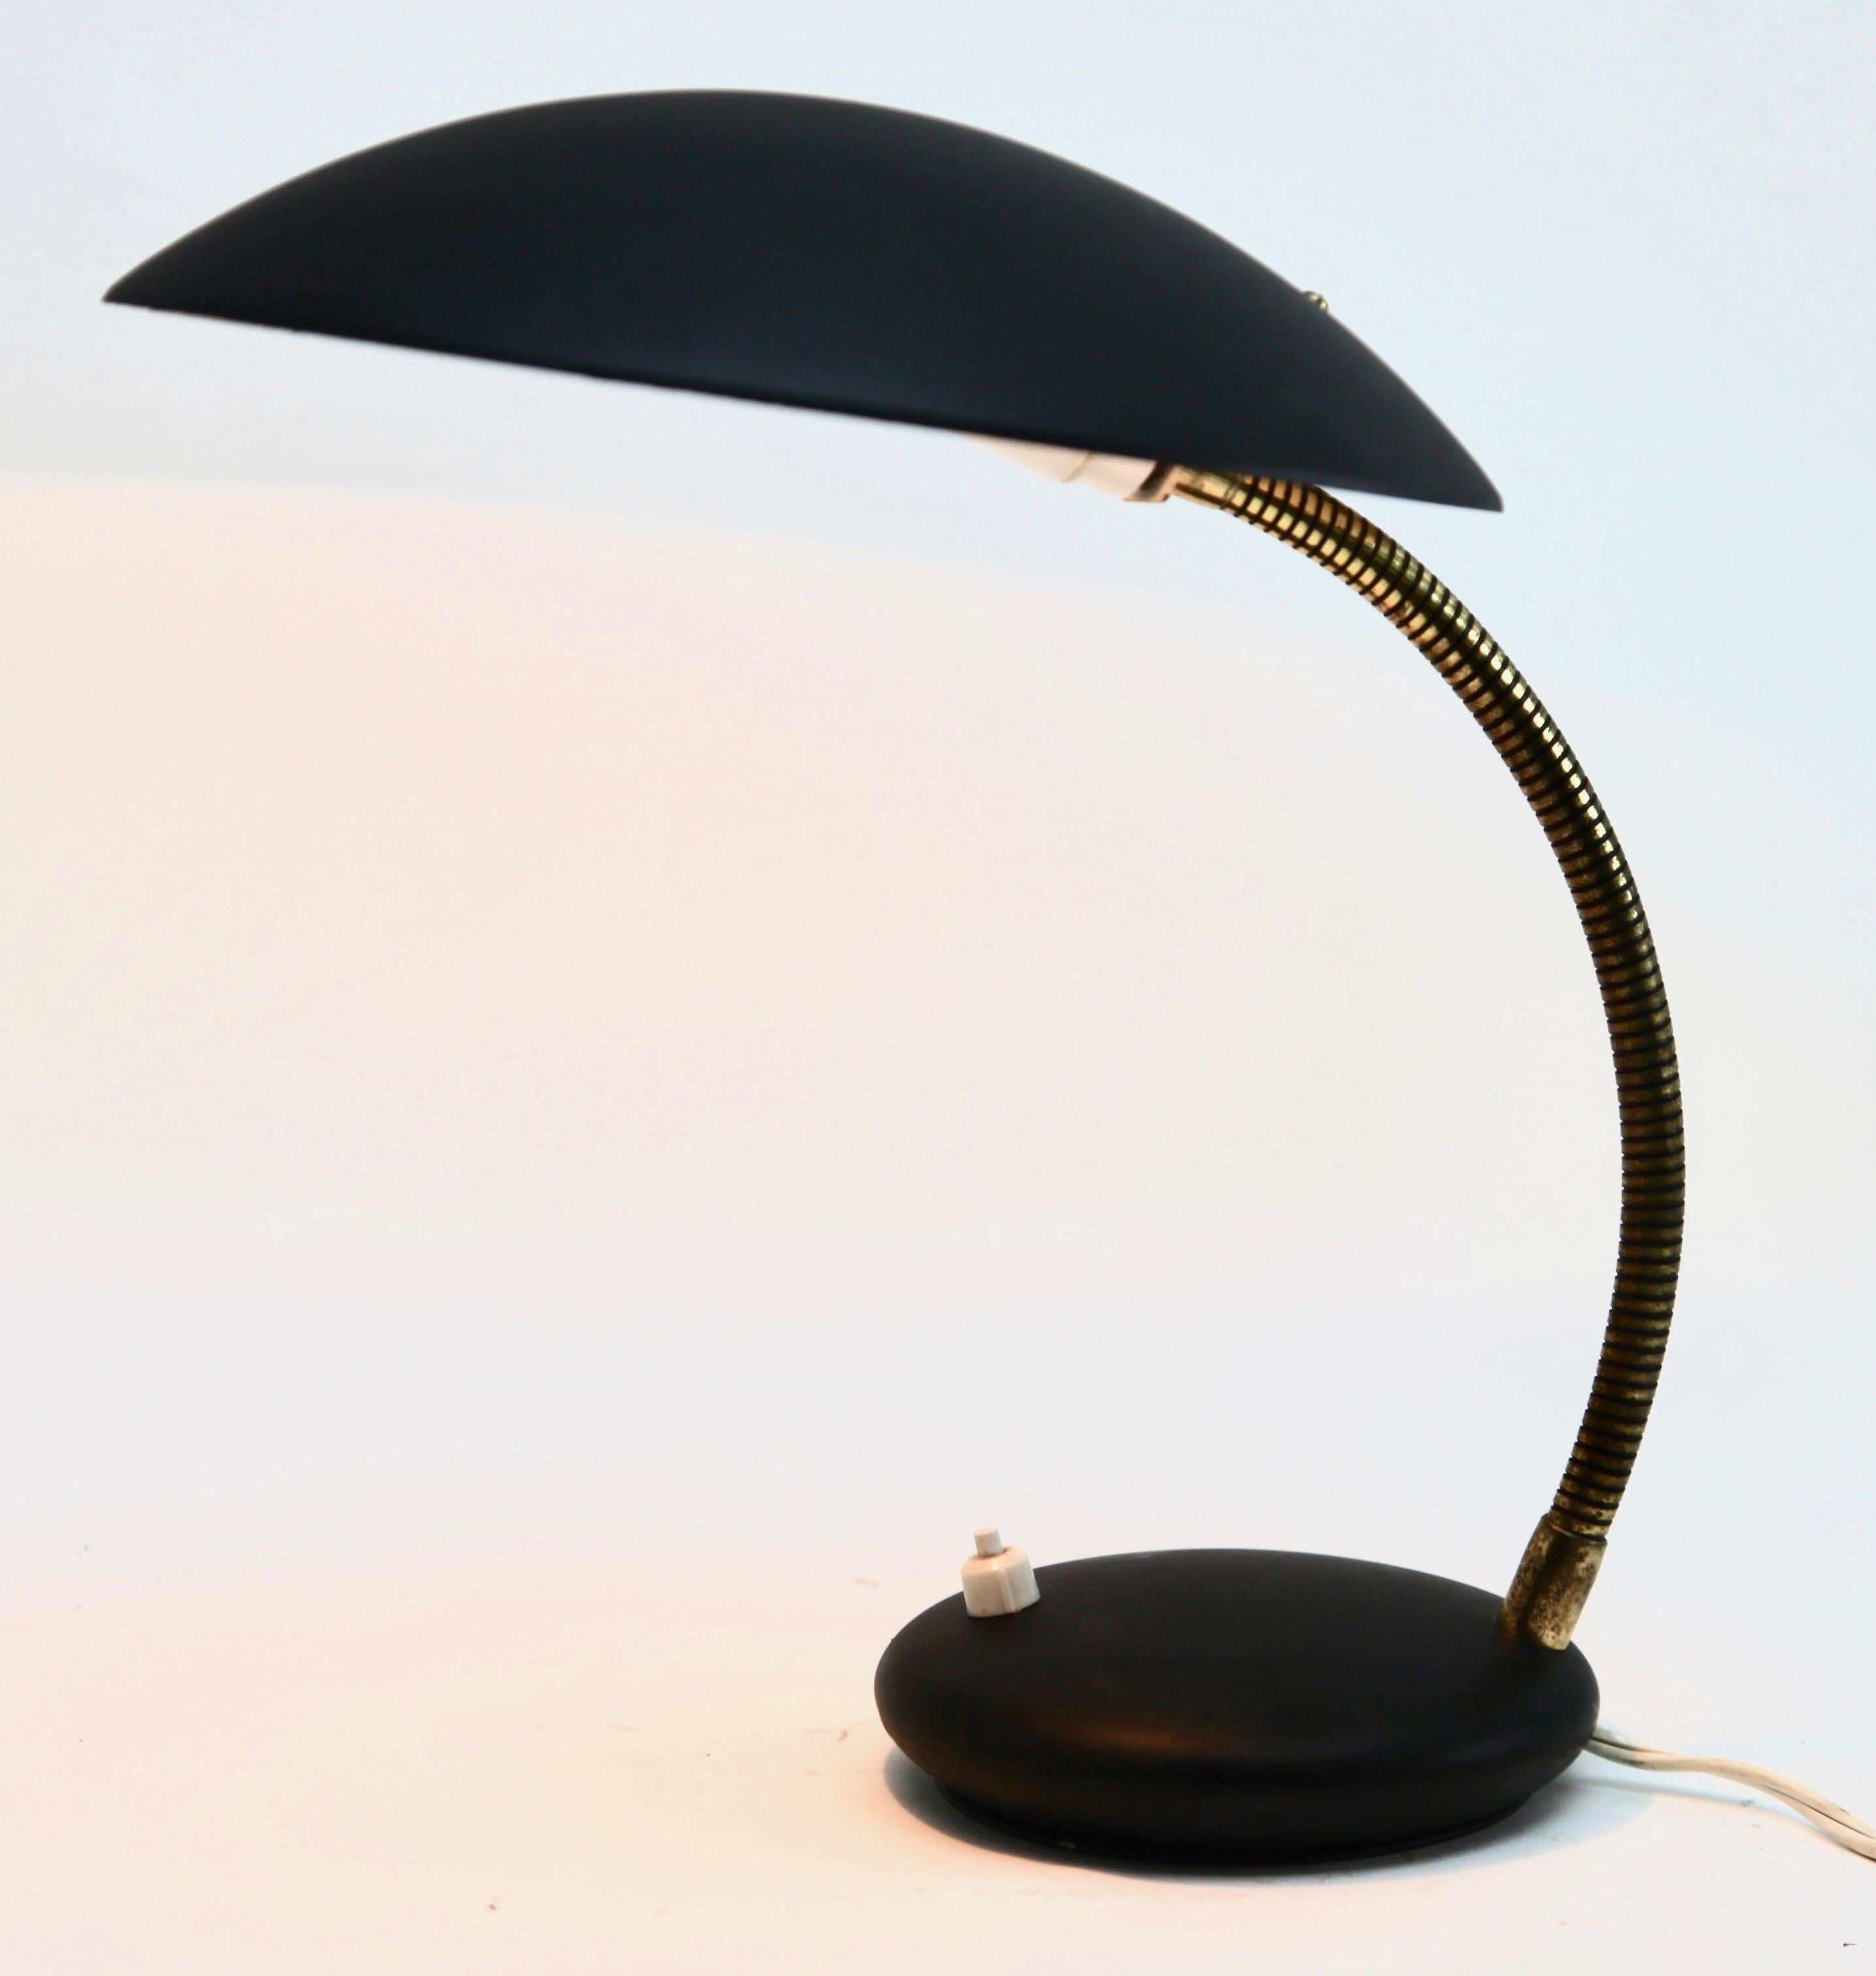 Classic compact design by Louise Kalff, this adjustable spotlight desk lamp was produced by Philips the 1970s.
The stand is metal and the flexible arm has brass patina, the lamp is fully original and in good condition
and has been left